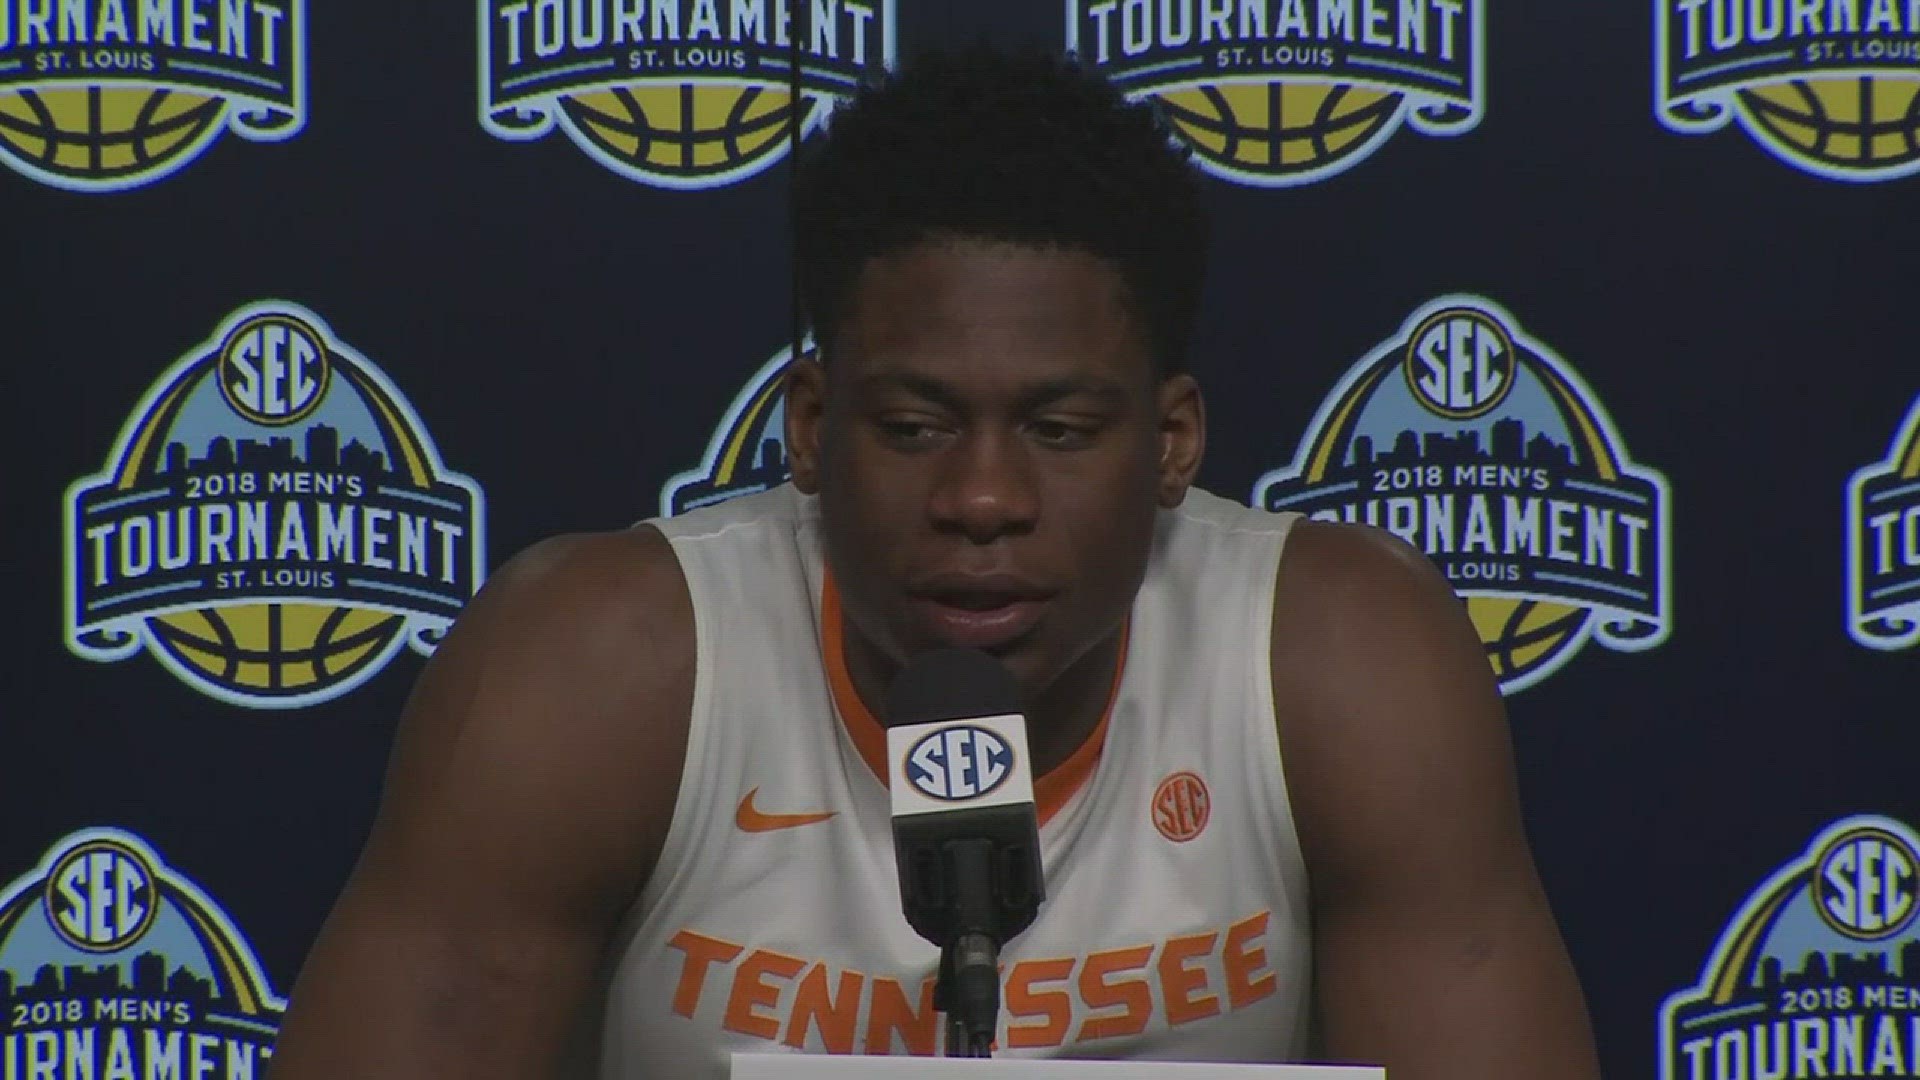 After scoring 22 points in the loss, Schofield says Tennessee will be motivated for the rest of the postseason.